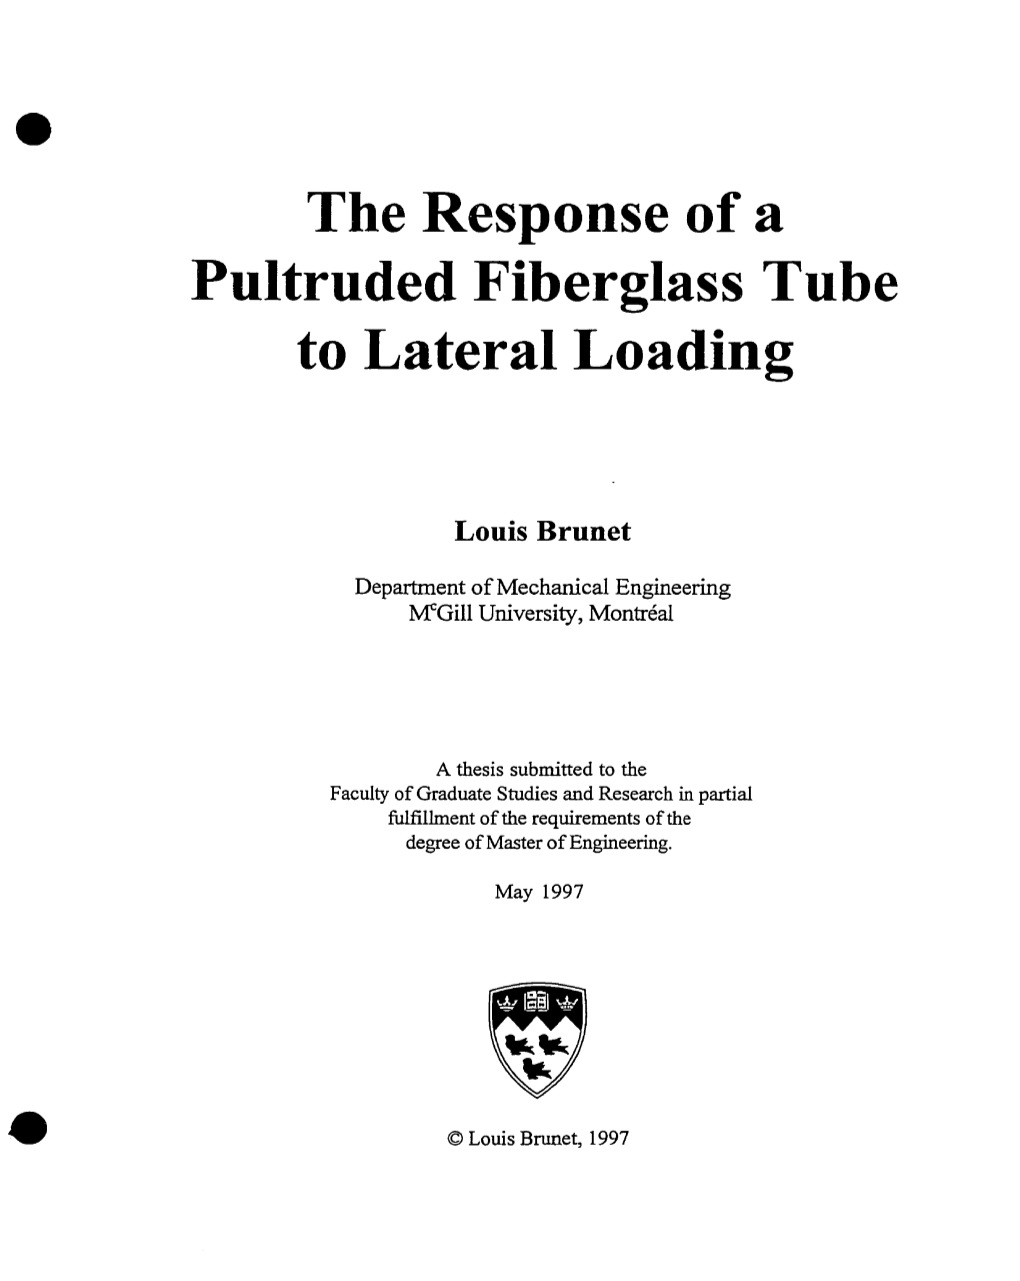 The Response of a Pultruded Fiberglass Tube to Lateral Loading